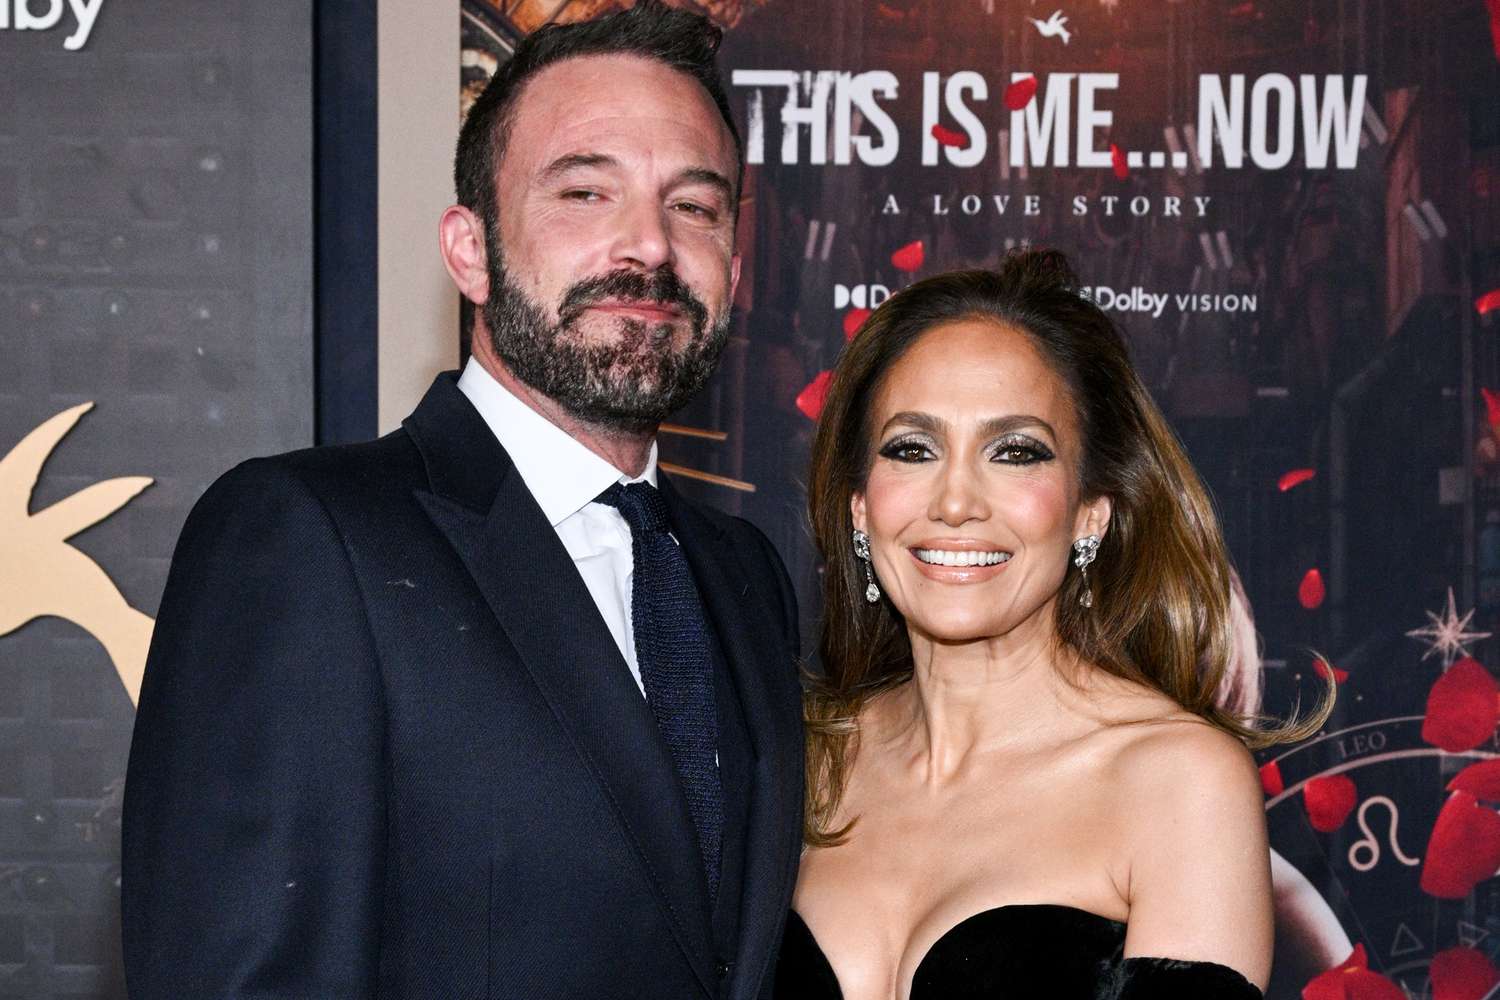 Ben Affleck and Jennifer Lopez Spotted Together for First Time in 47 Days, Wearing Wedding Rings